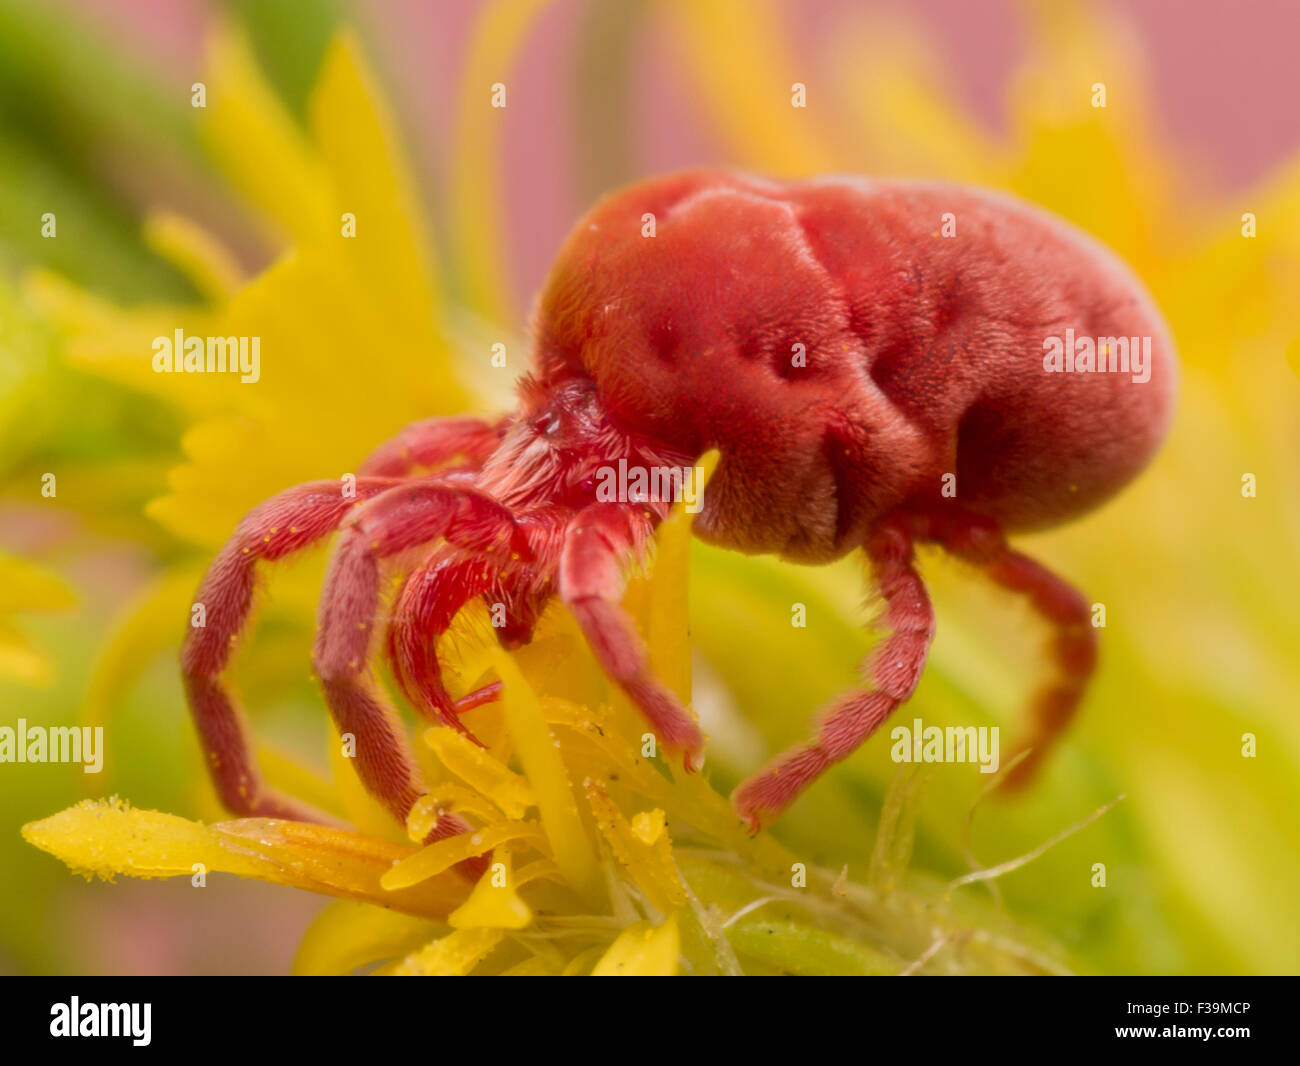 Soft, furry red velvet mite climbs on a yellow flower.  These tiny creatures look like red bean bag chairs. Stock Photo